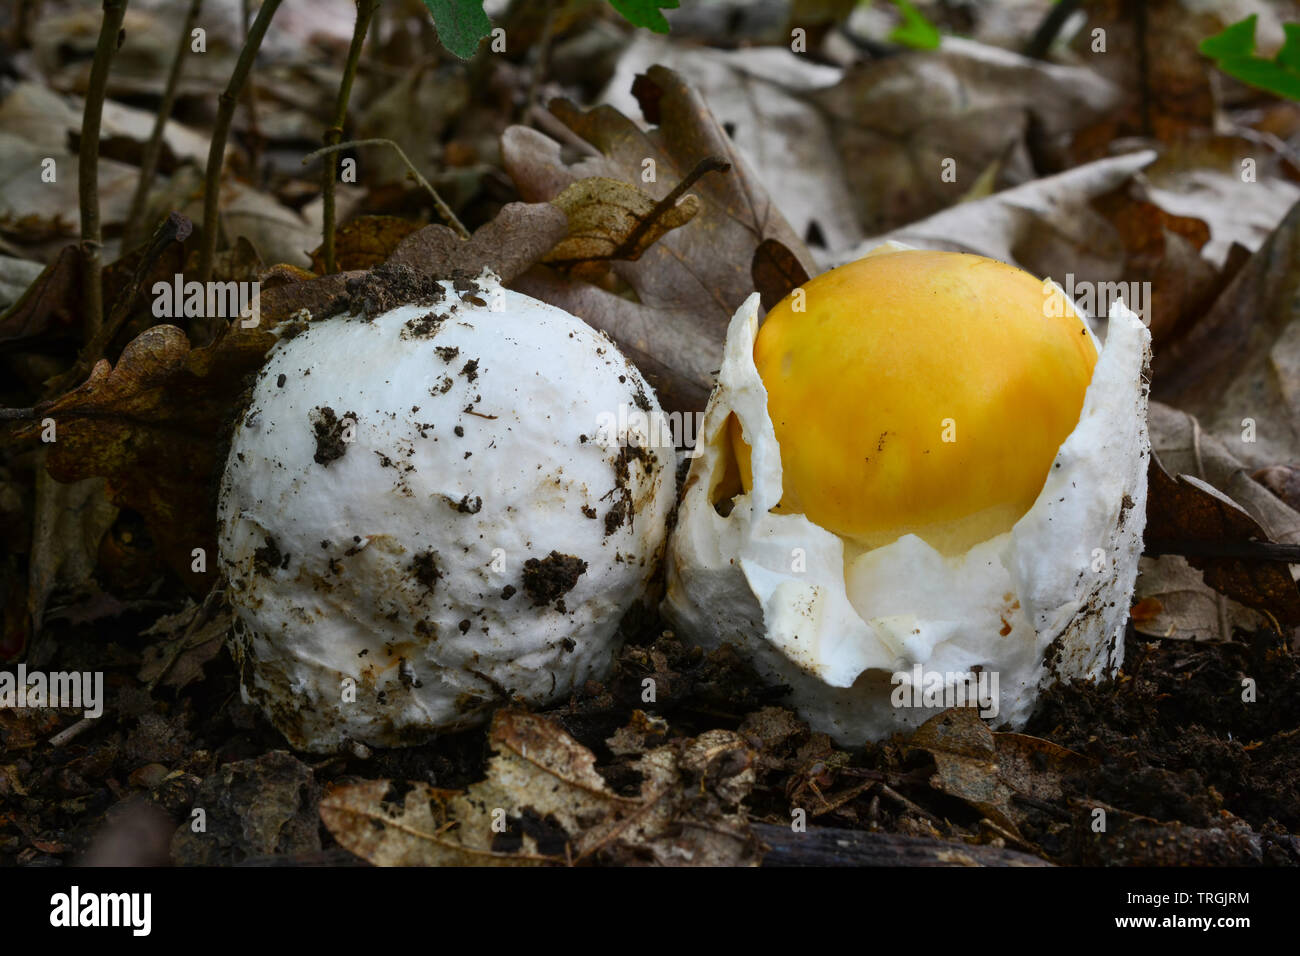 Two very young and healthy specimen of Amanita caesarea or Caesar's mushrooms, one of them still in the egg stage, the other partially opened, close u Stock Photo